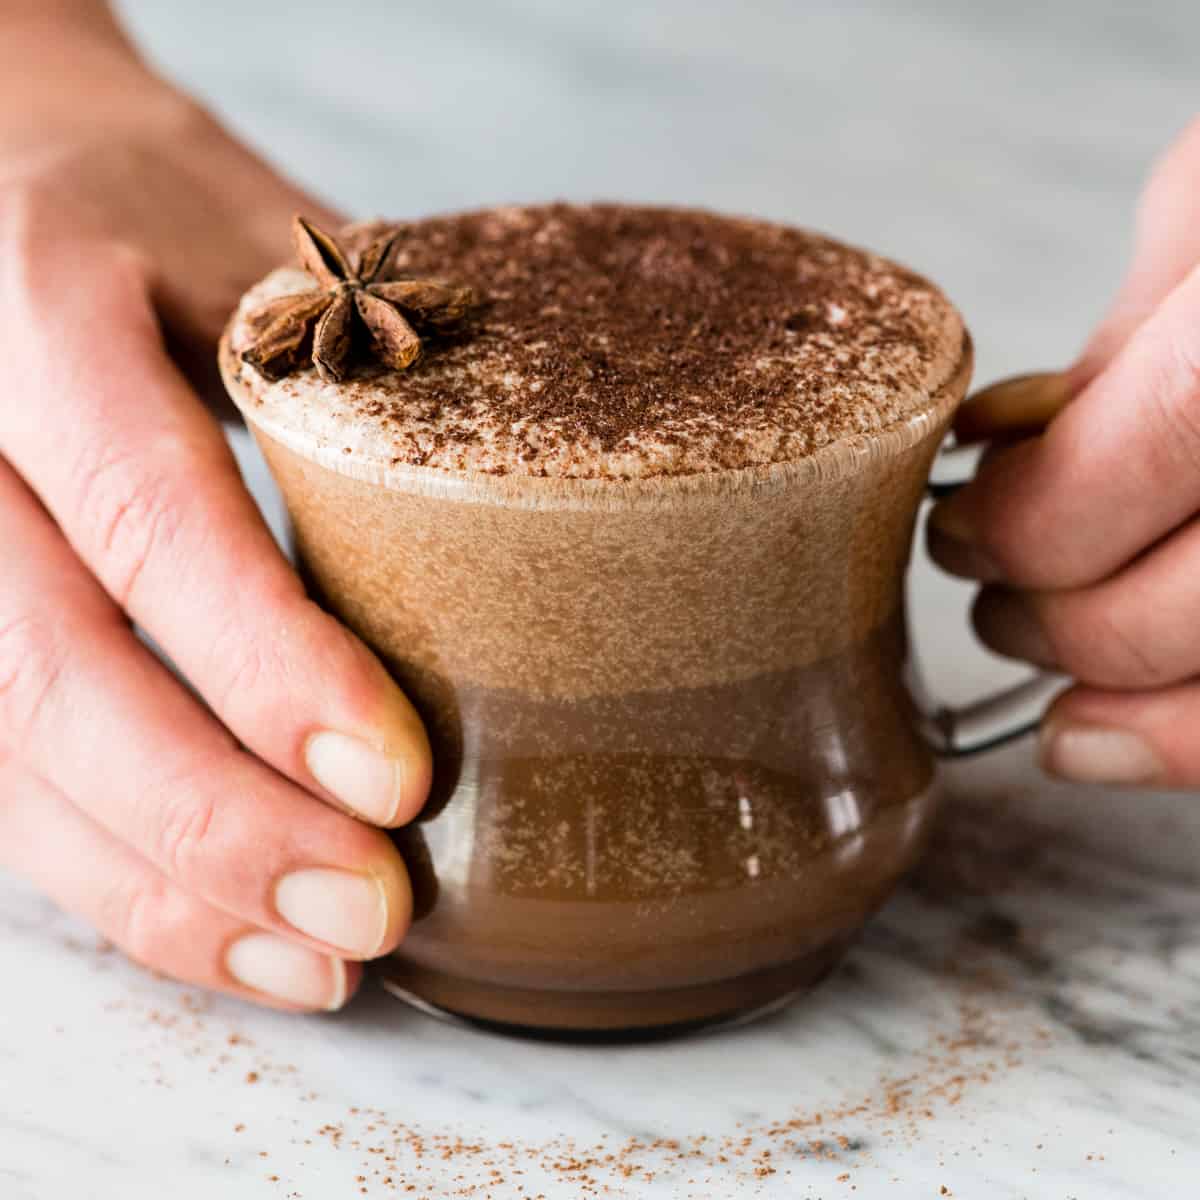 Front view of hands holding a glass mug filled with Dairy-Free Mocha Latte garnished with cocoa powder and star anise 